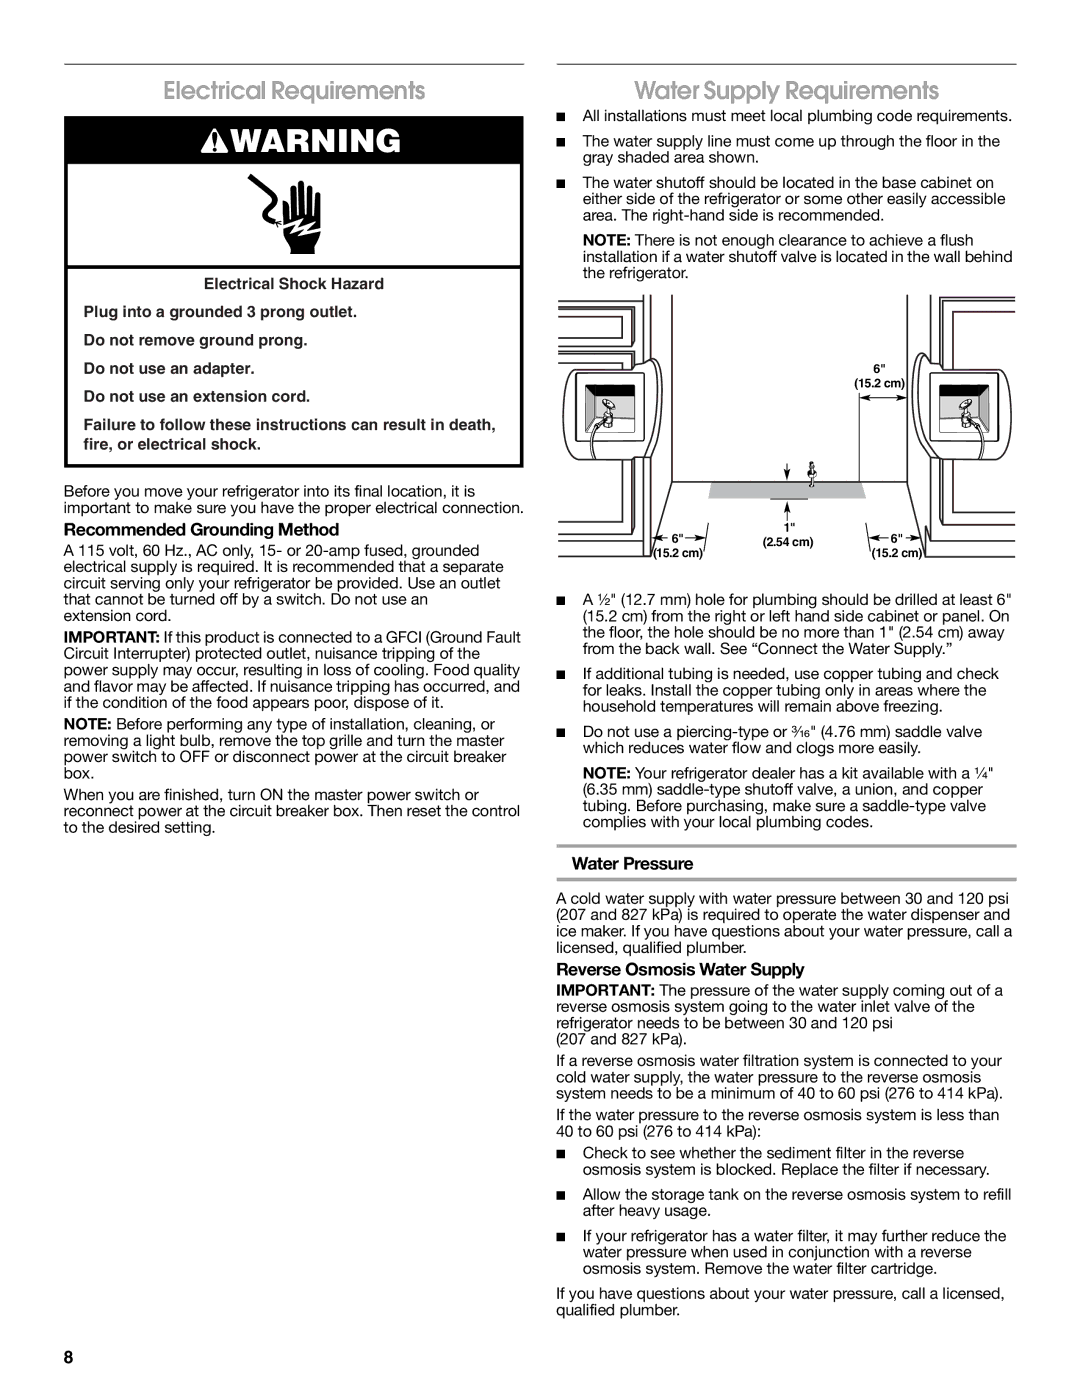 Jenn-Air W10379136A Electrical Requirements, Recommended Grounding Method, Water Pressure, Reverse Osmosis Water Supply 